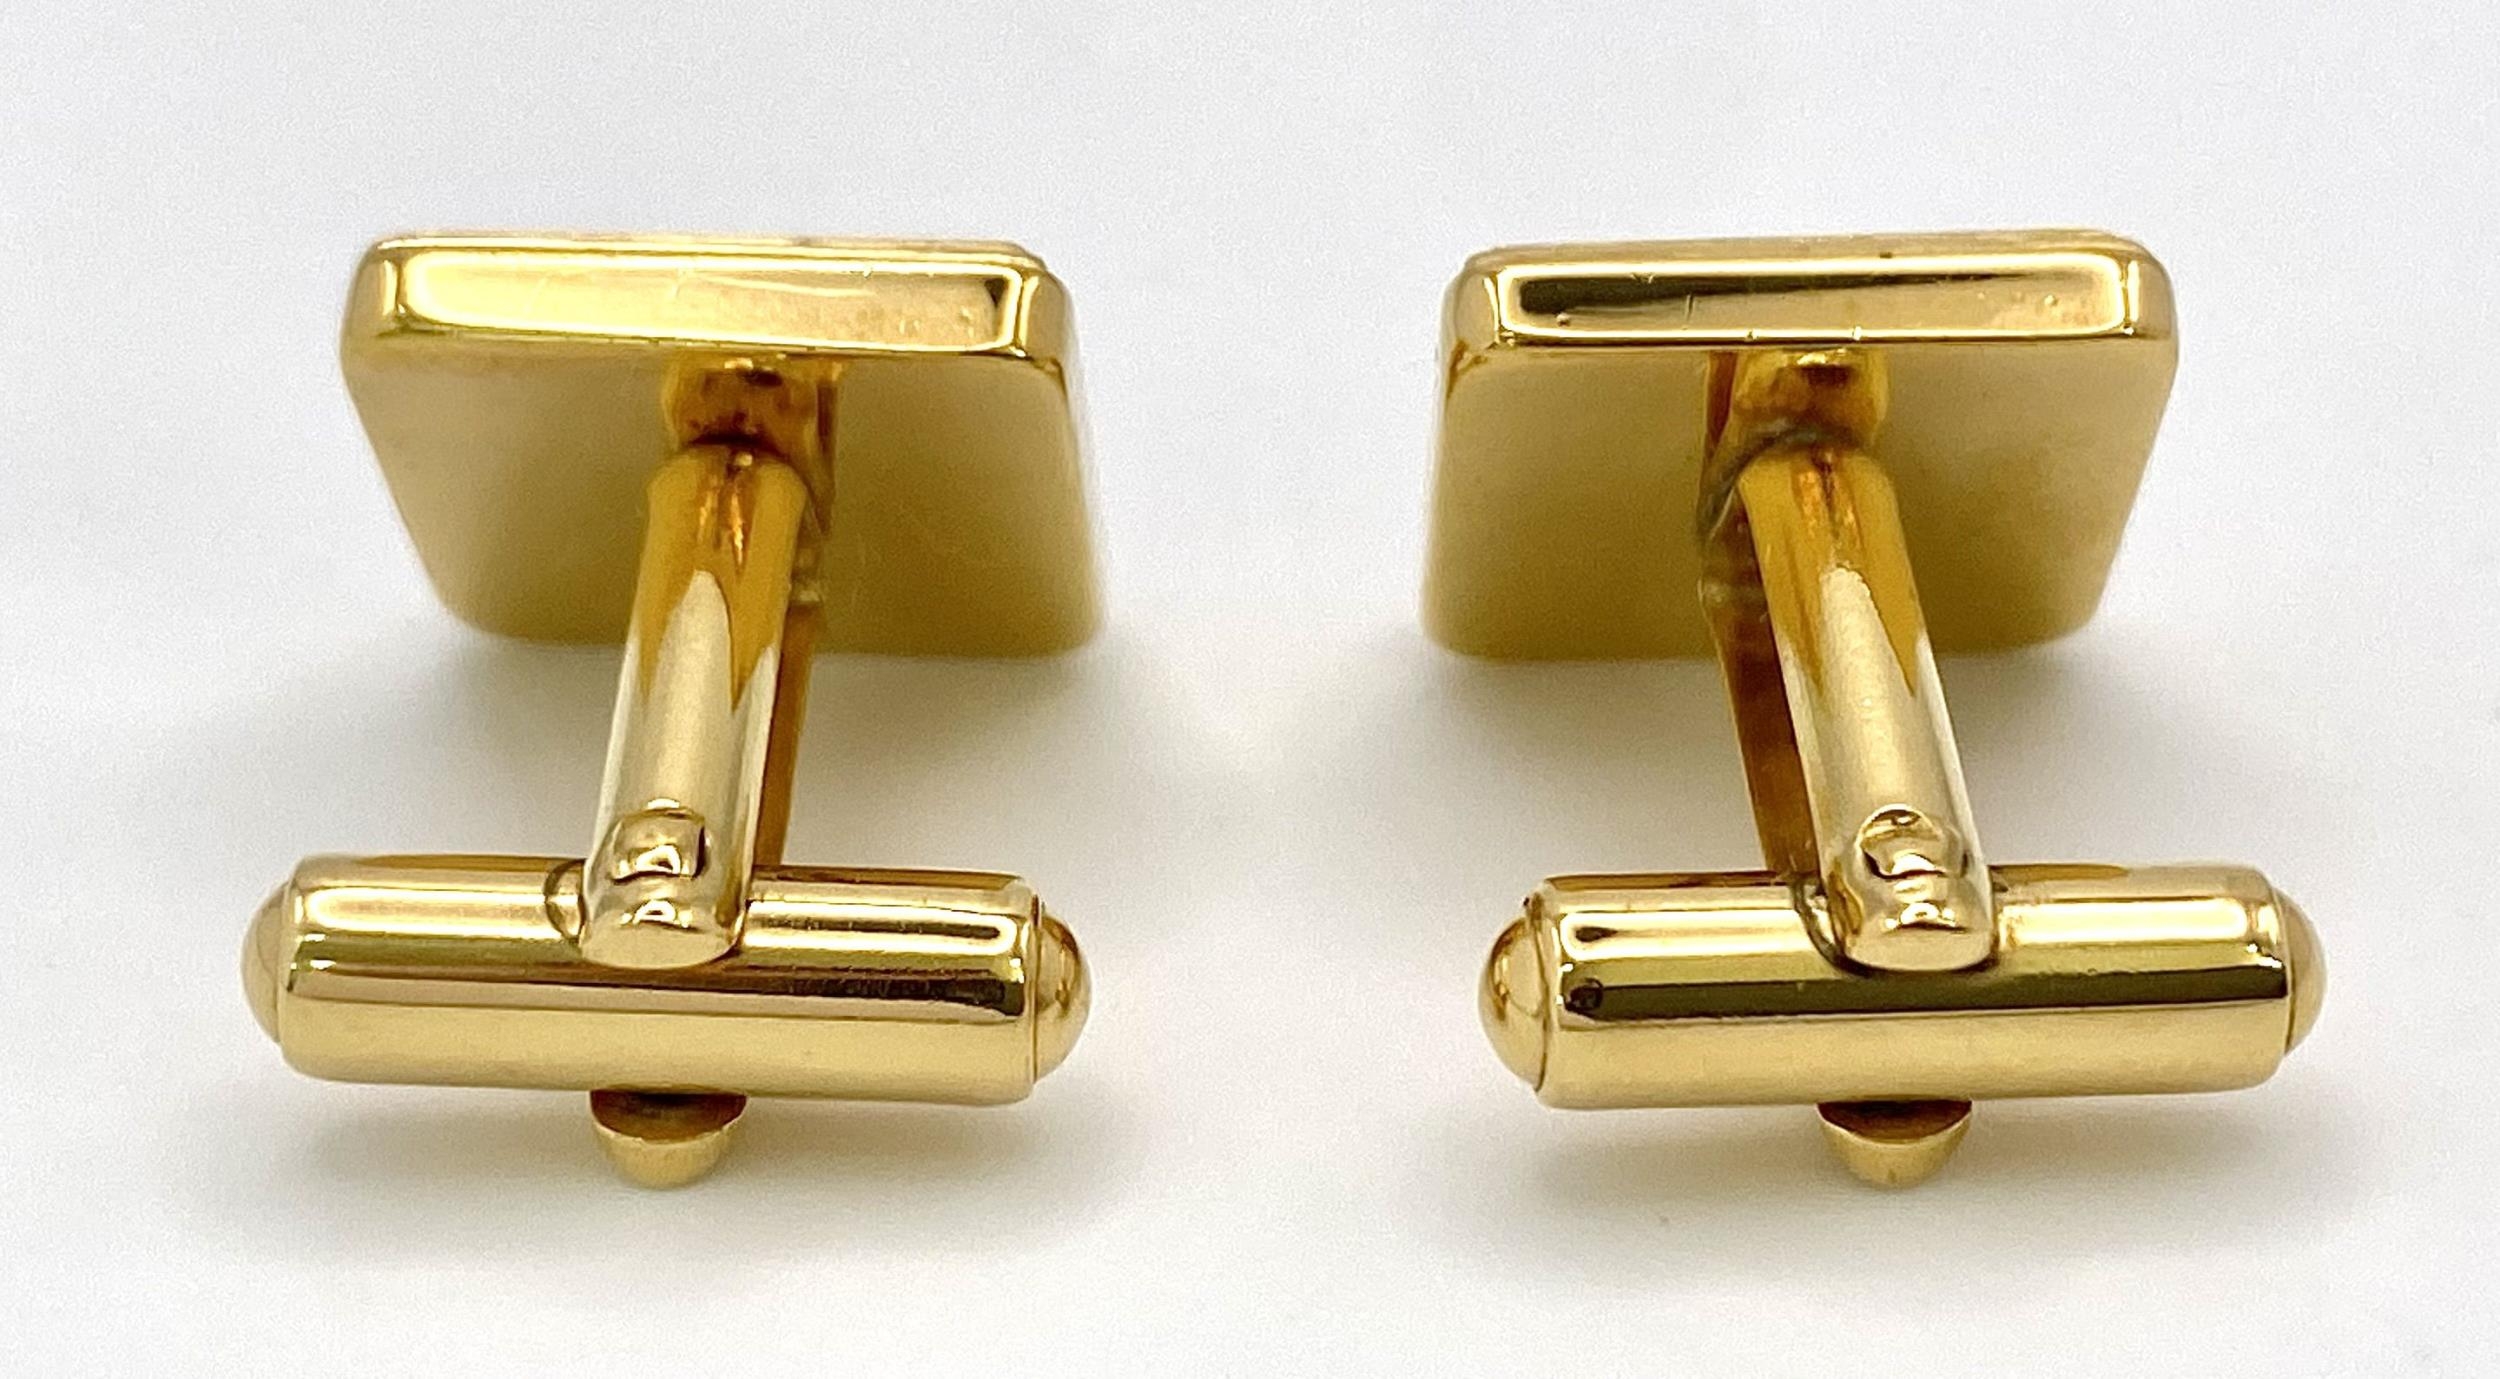 An Excellent Condition Pair of Square Yellow Gold Gilt Tortoiseshell Cufflinks by Dunhill in their - Image 6 of 9